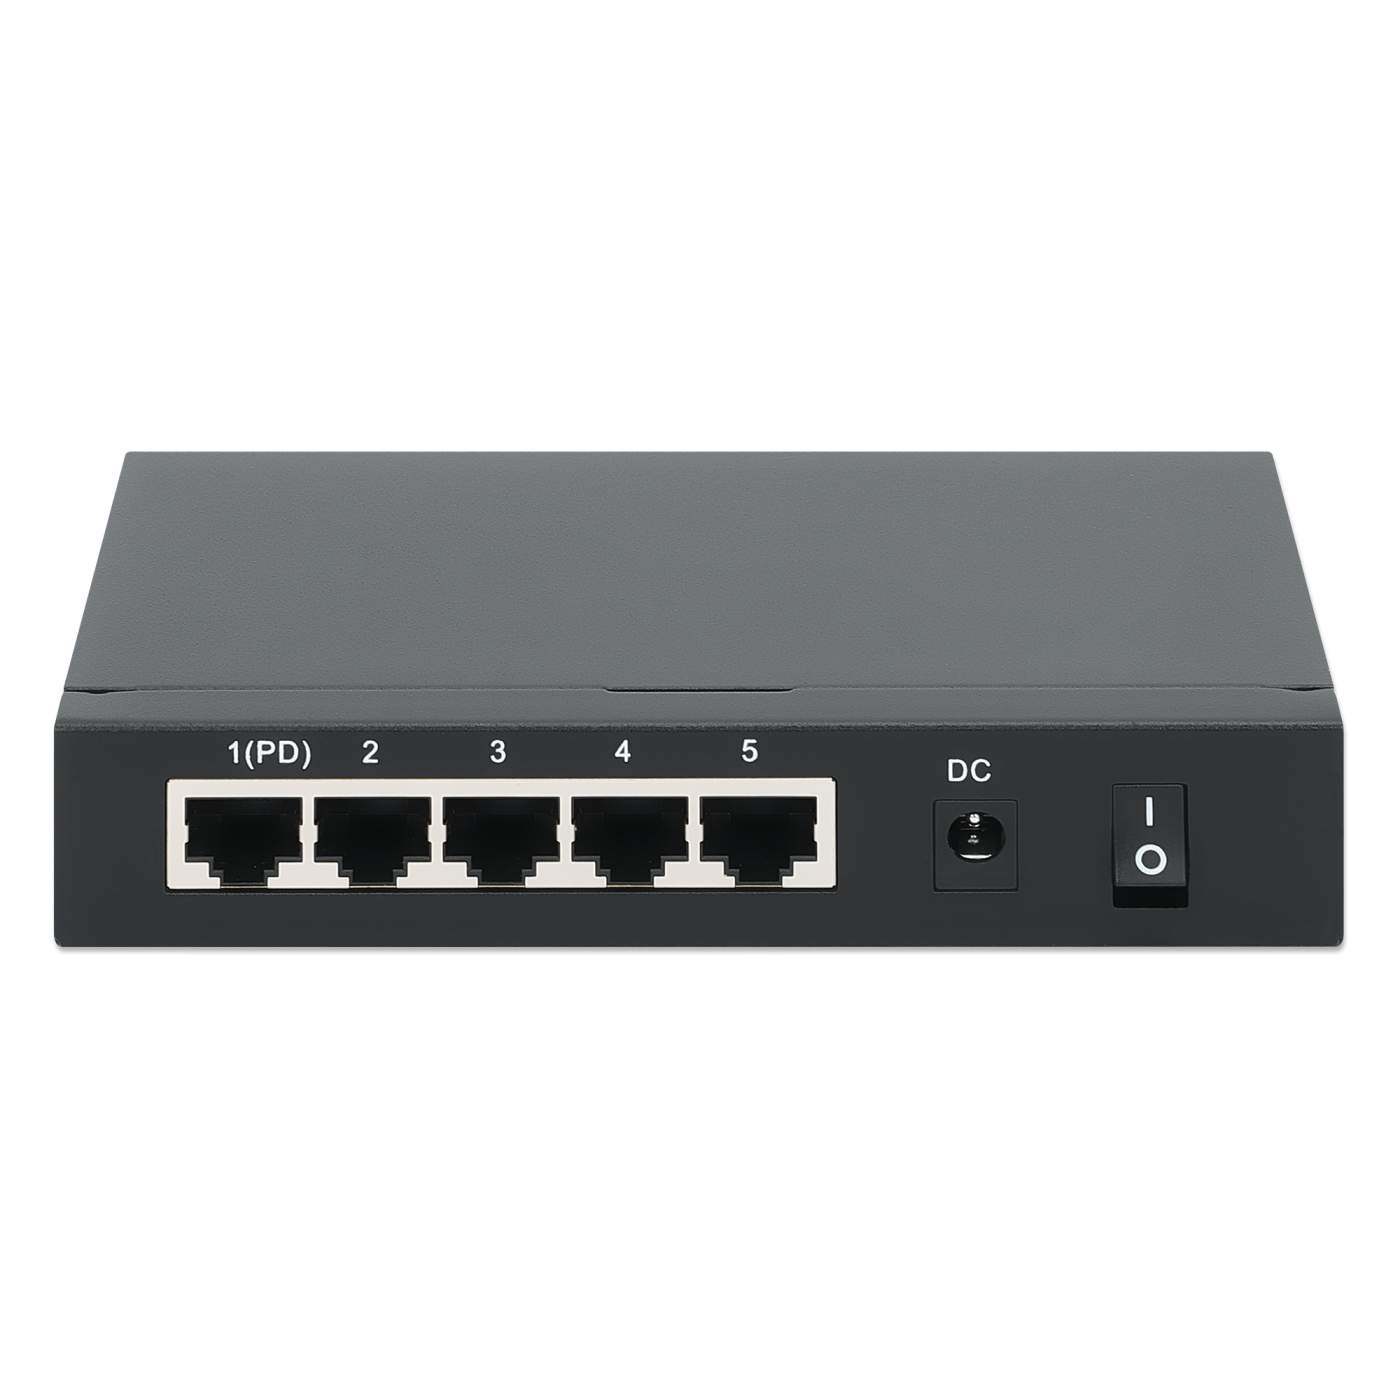 PoE Powered 5-Port Gigabit Switch with PoE Passthrough